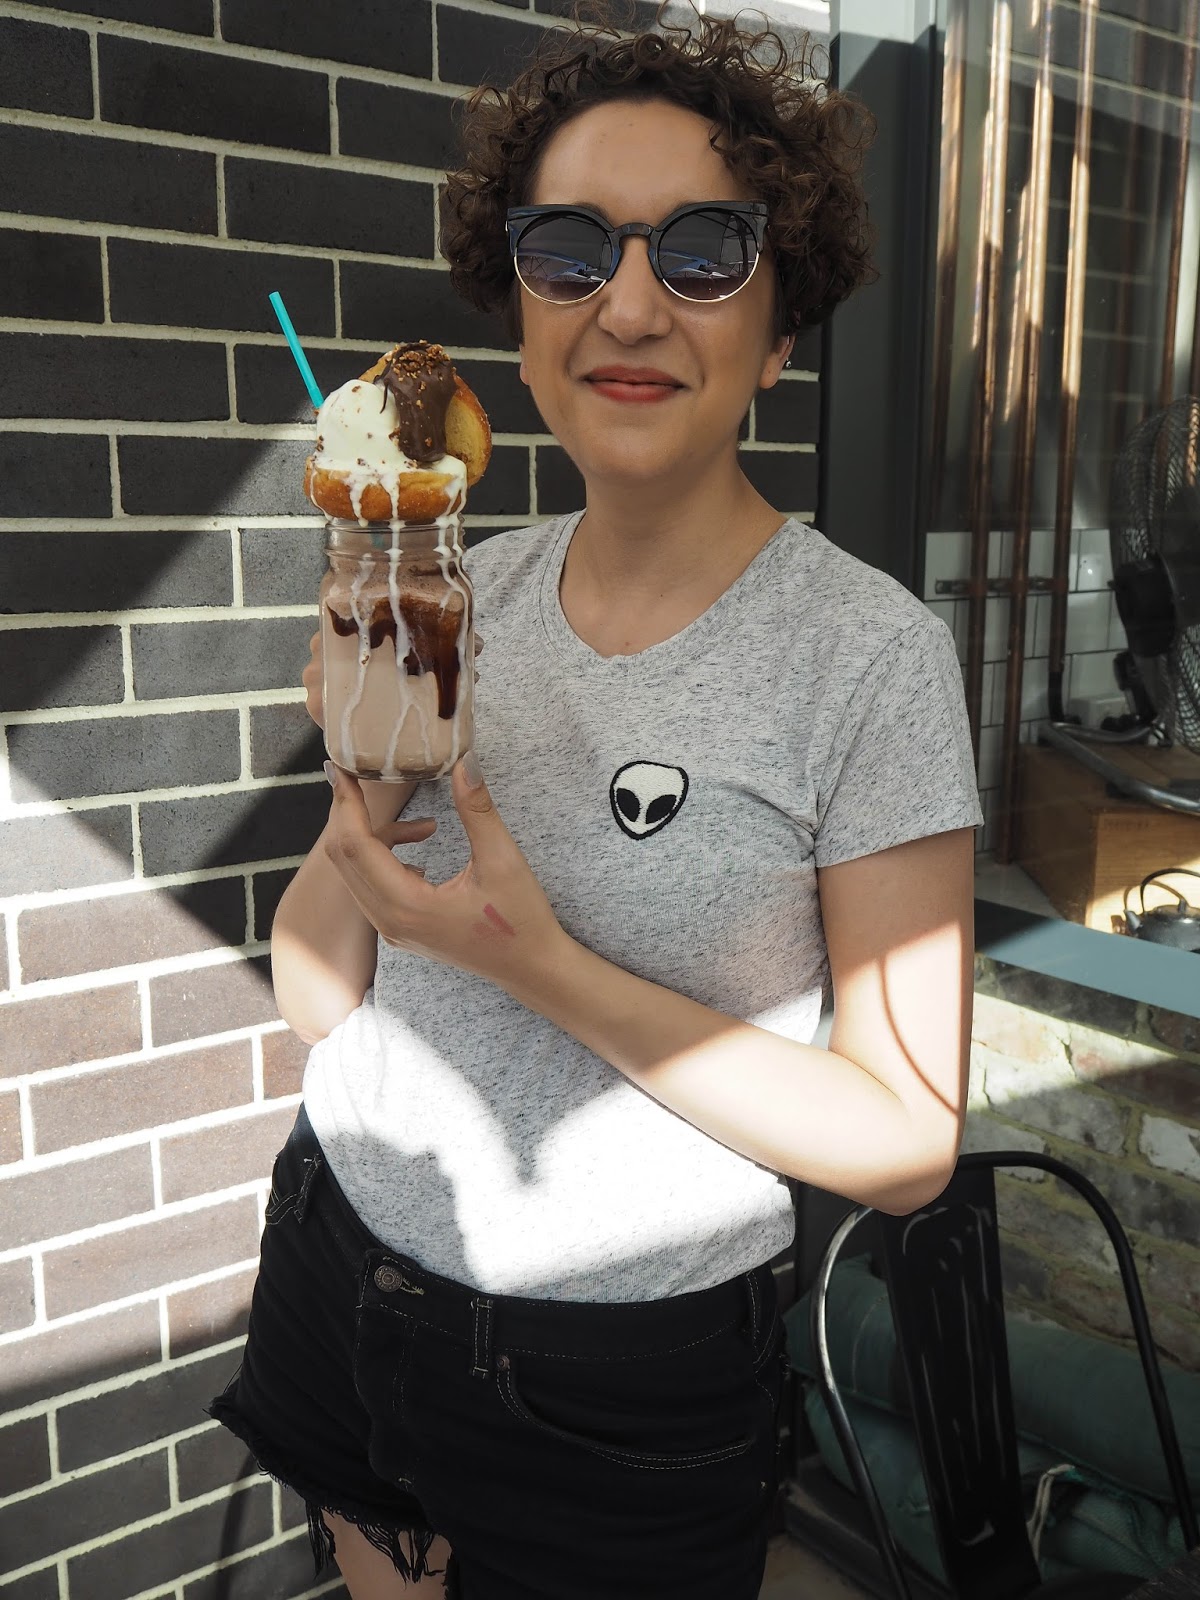 Woman with nutella and ice cream freakshake